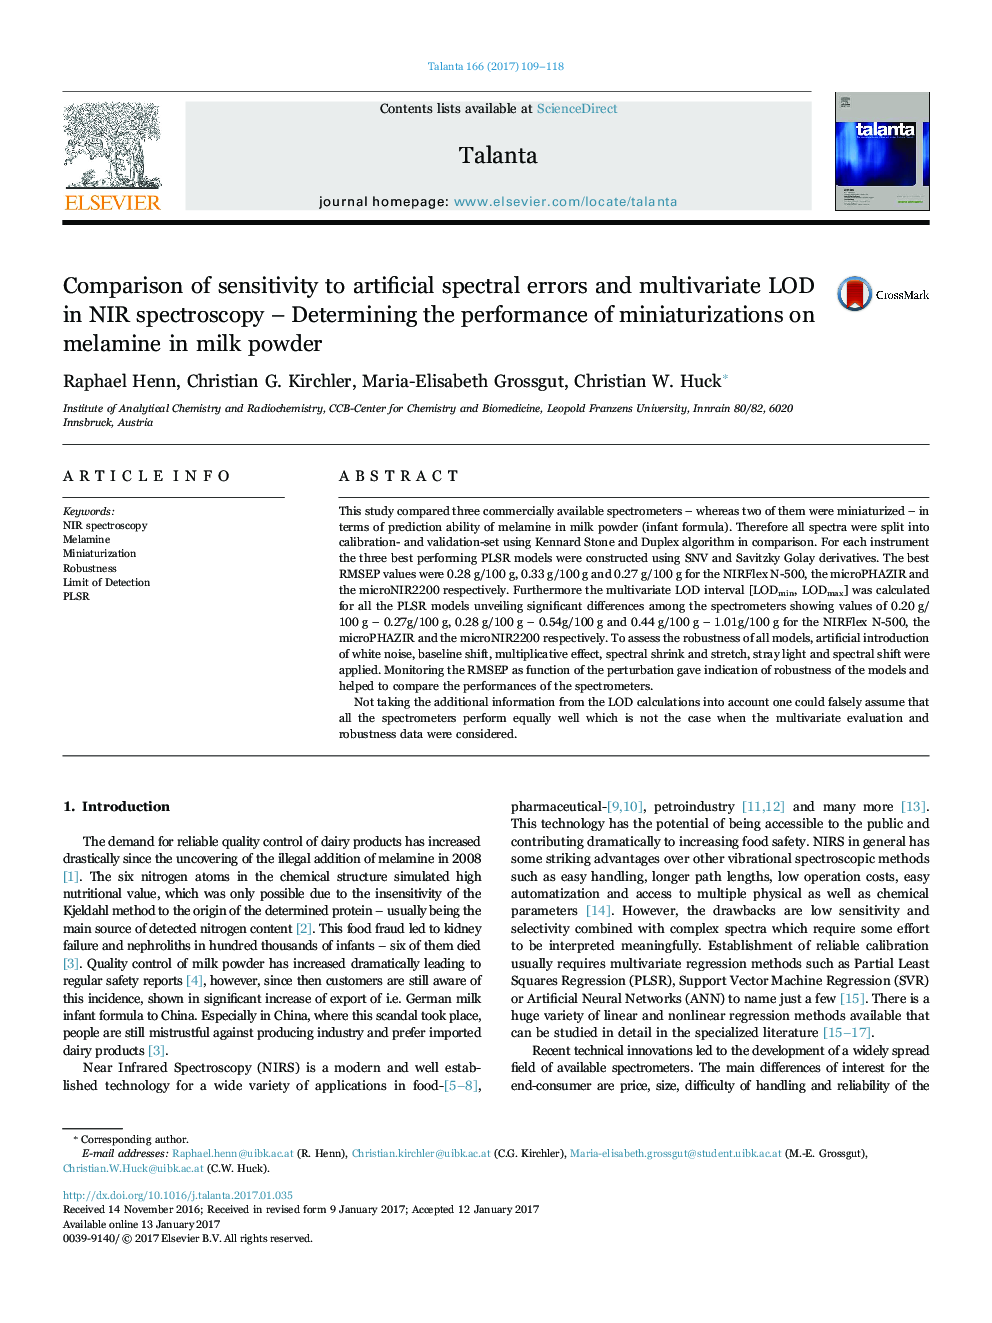 Comparison of sensitivity to artificial spectral errors and multivariate LOD in NIR spectroscopy - Determining the performance of miniaturizations on melamine in milk powder